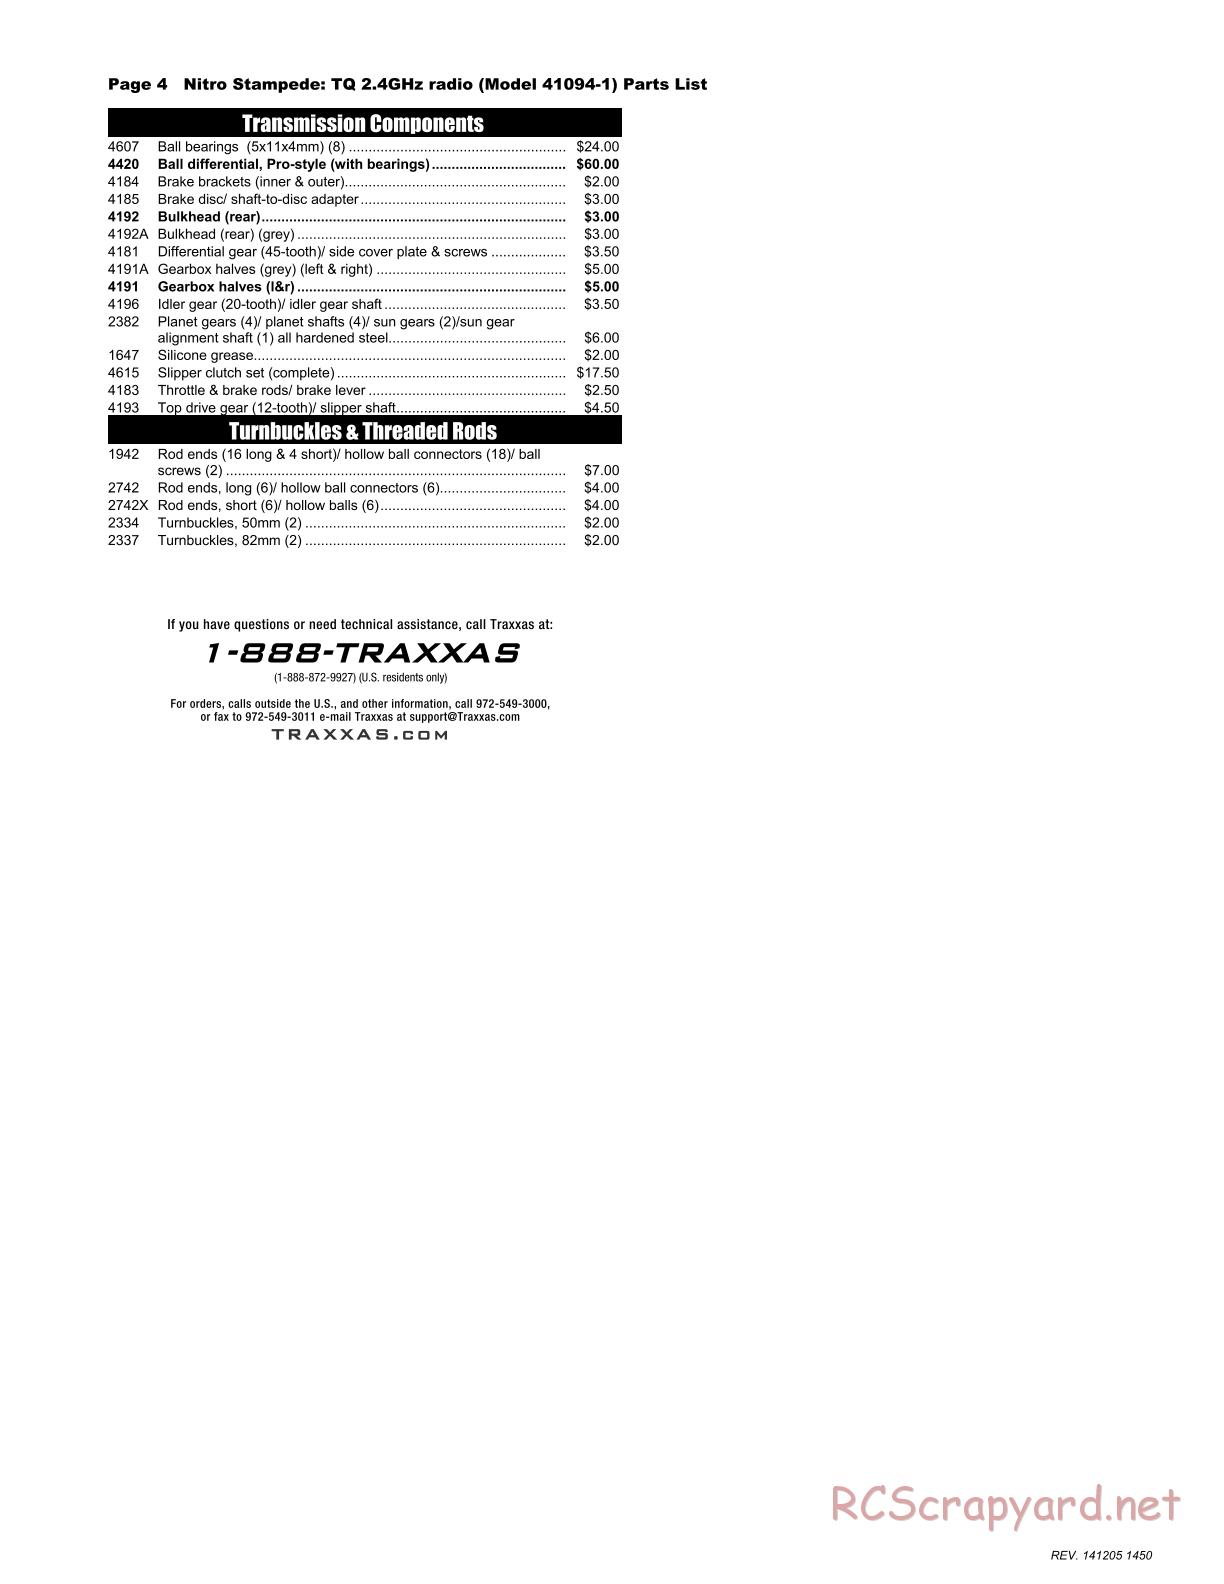 Traxxas - Nitro Stampede (2015) - Parts List - Page 4